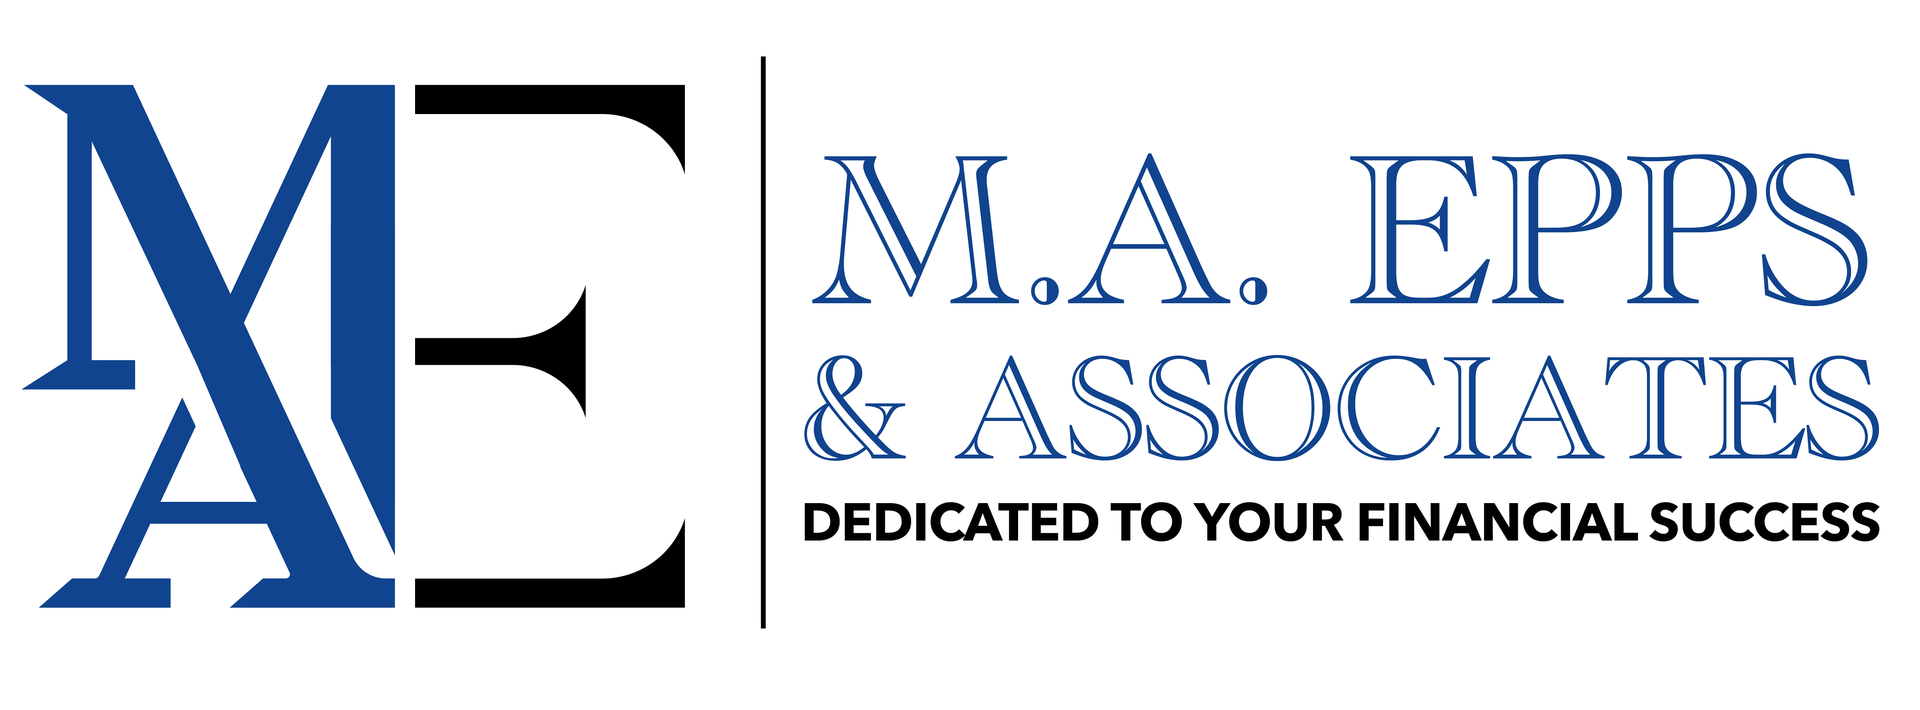 M.A. Epps and Associates